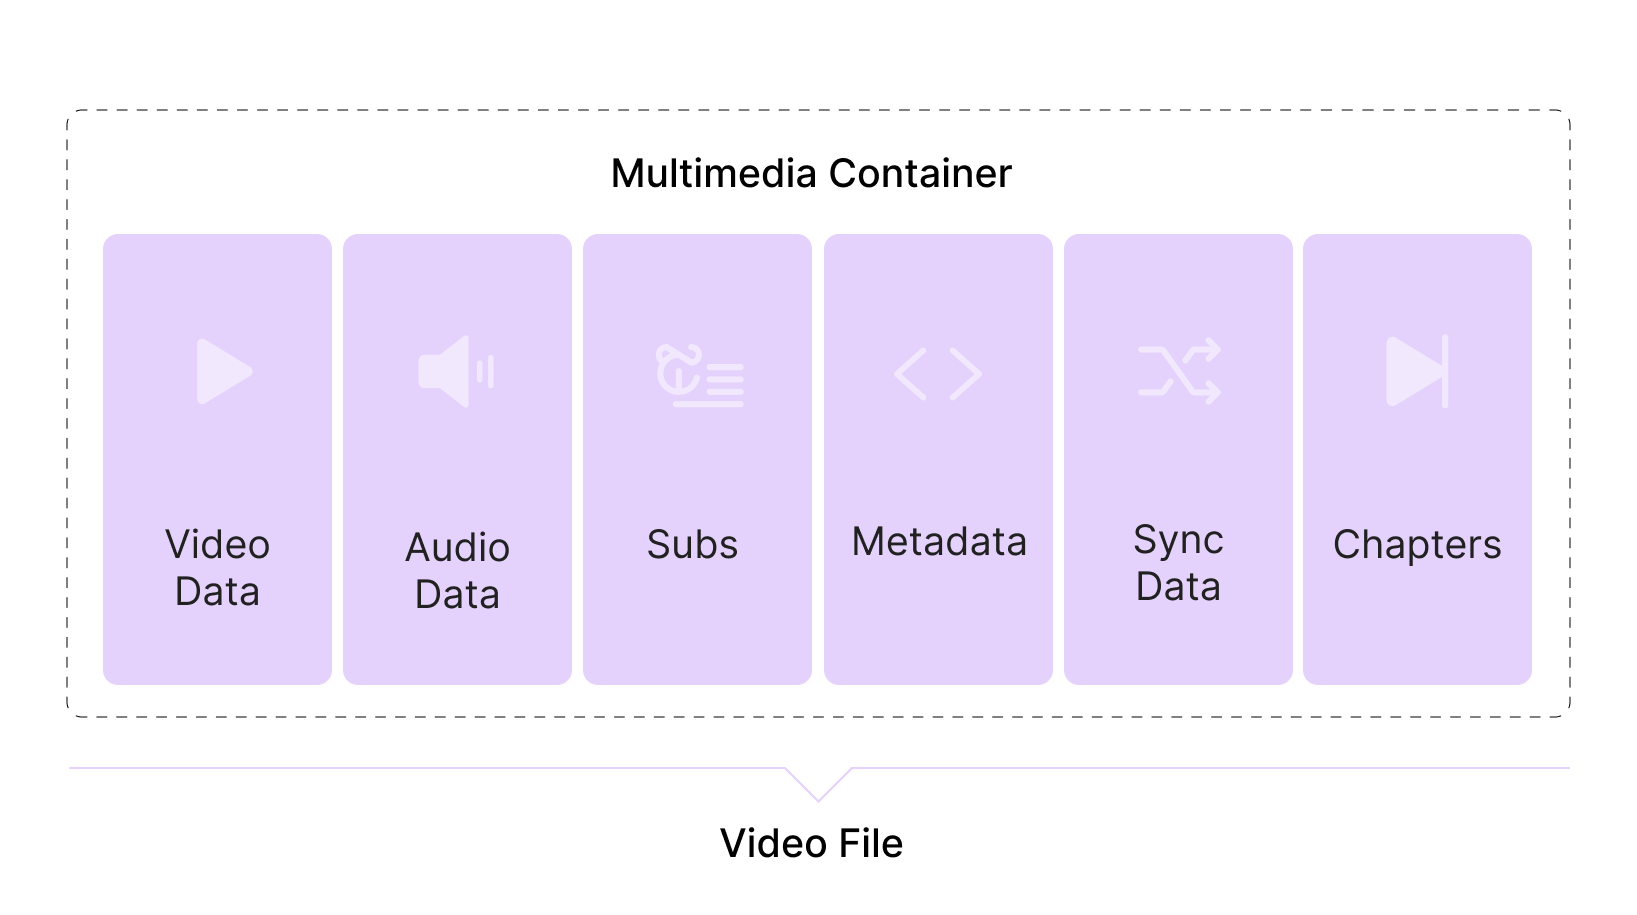 A schematic representation of a multimedia container